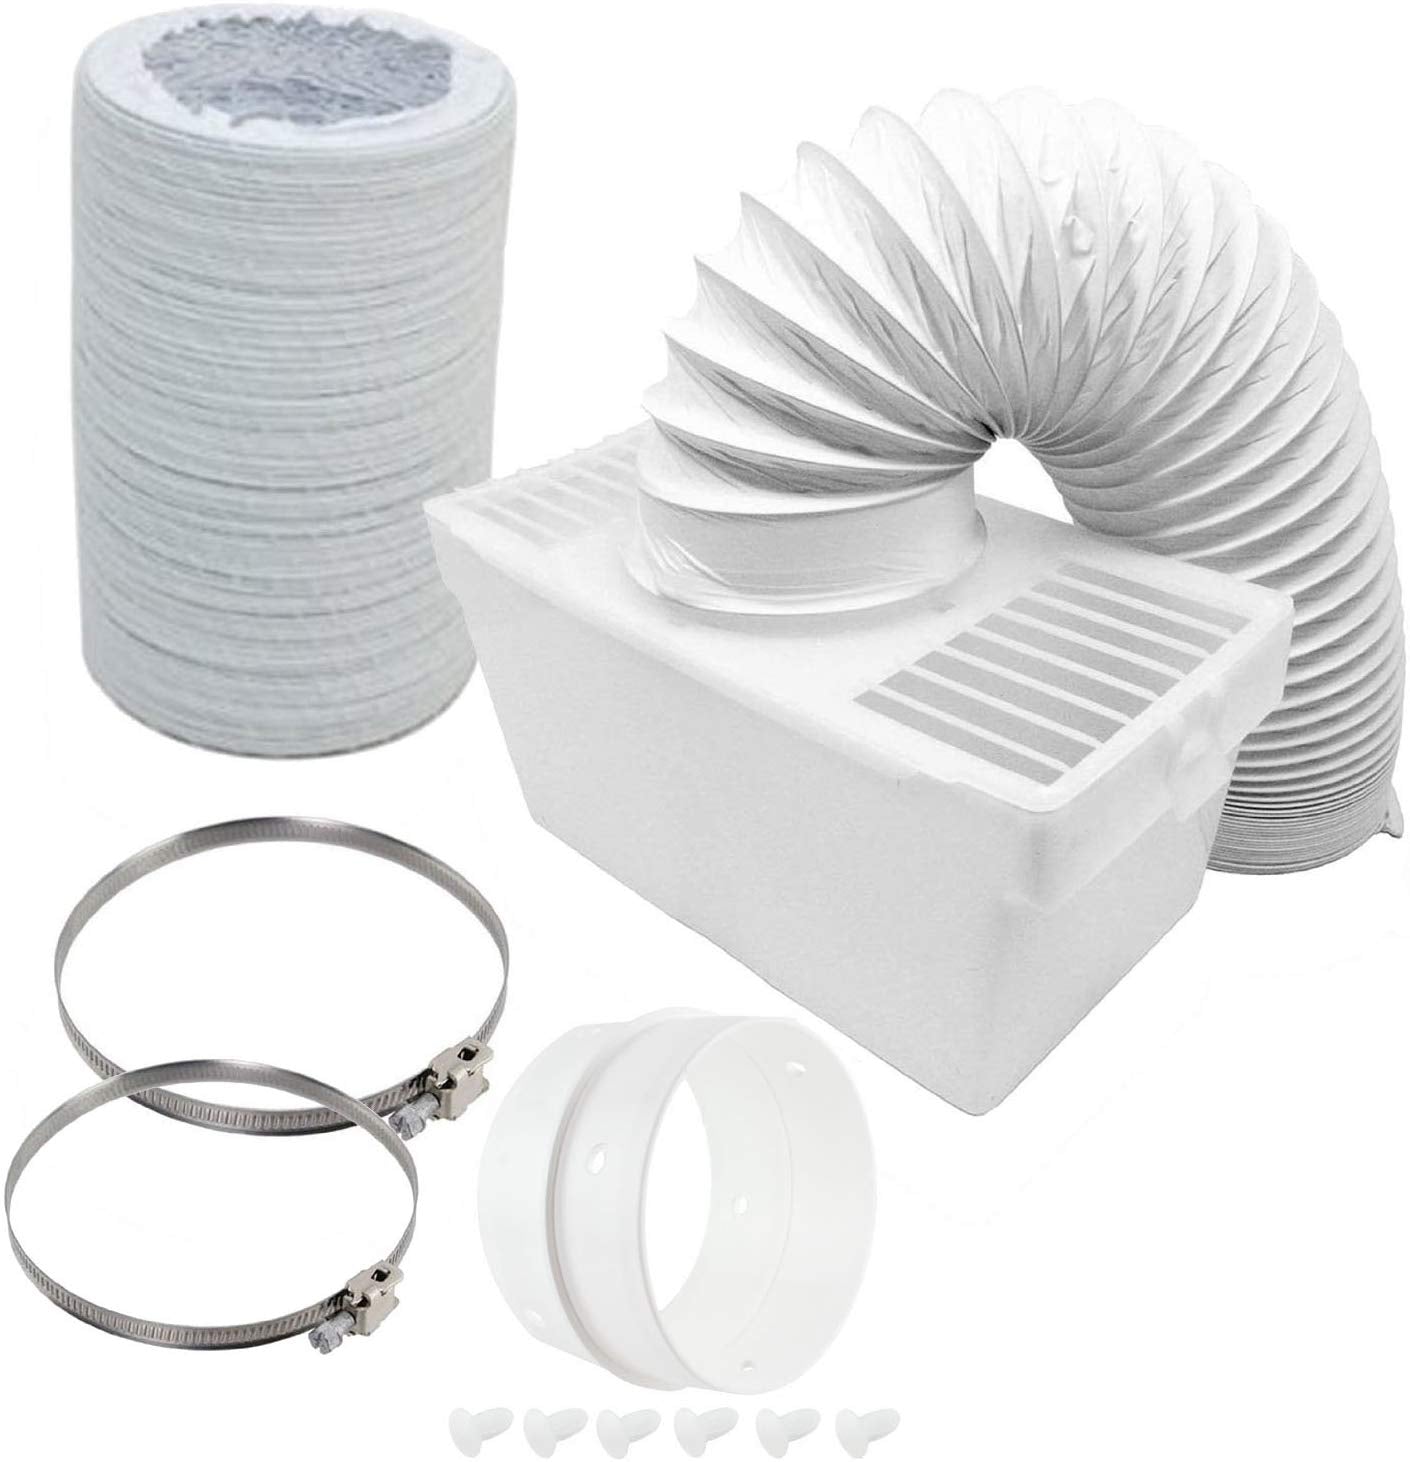 Condenser Box & Extra Long Hose Kit With Connection Ring for Amica Tumble Dryer (4" / 100mm Diameter / 6M Hose)